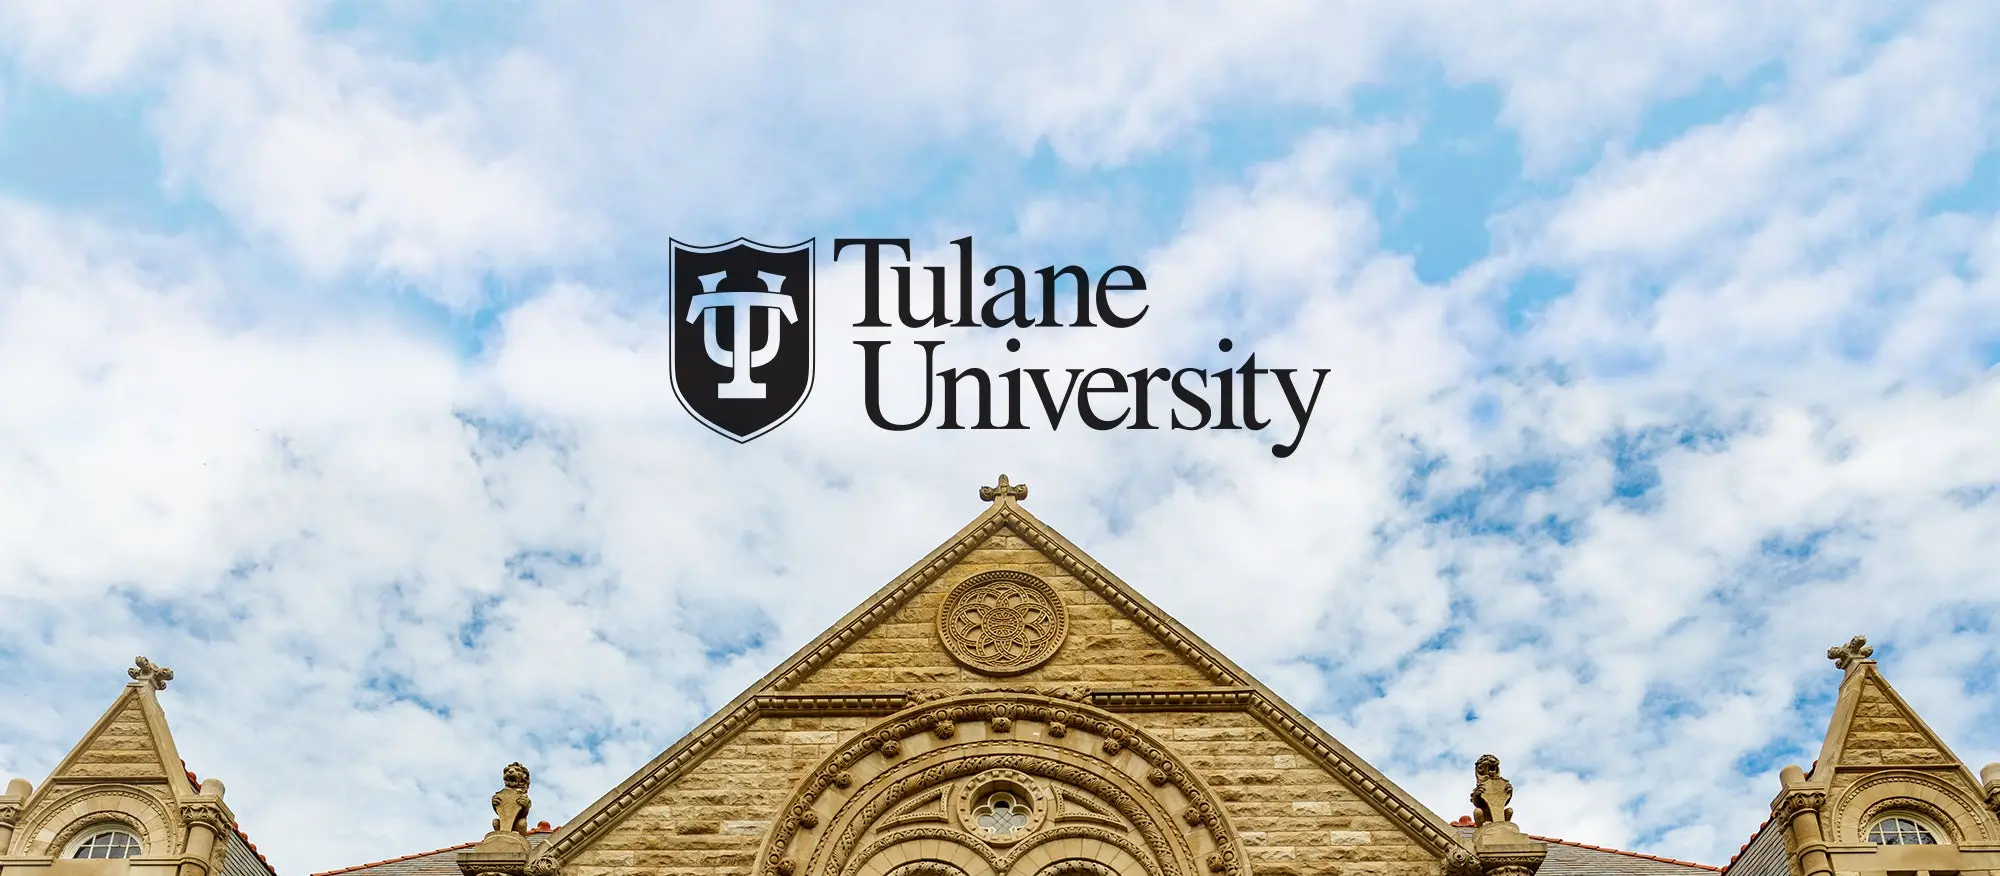 Tulane University logo against a background of clouds and blue sky.